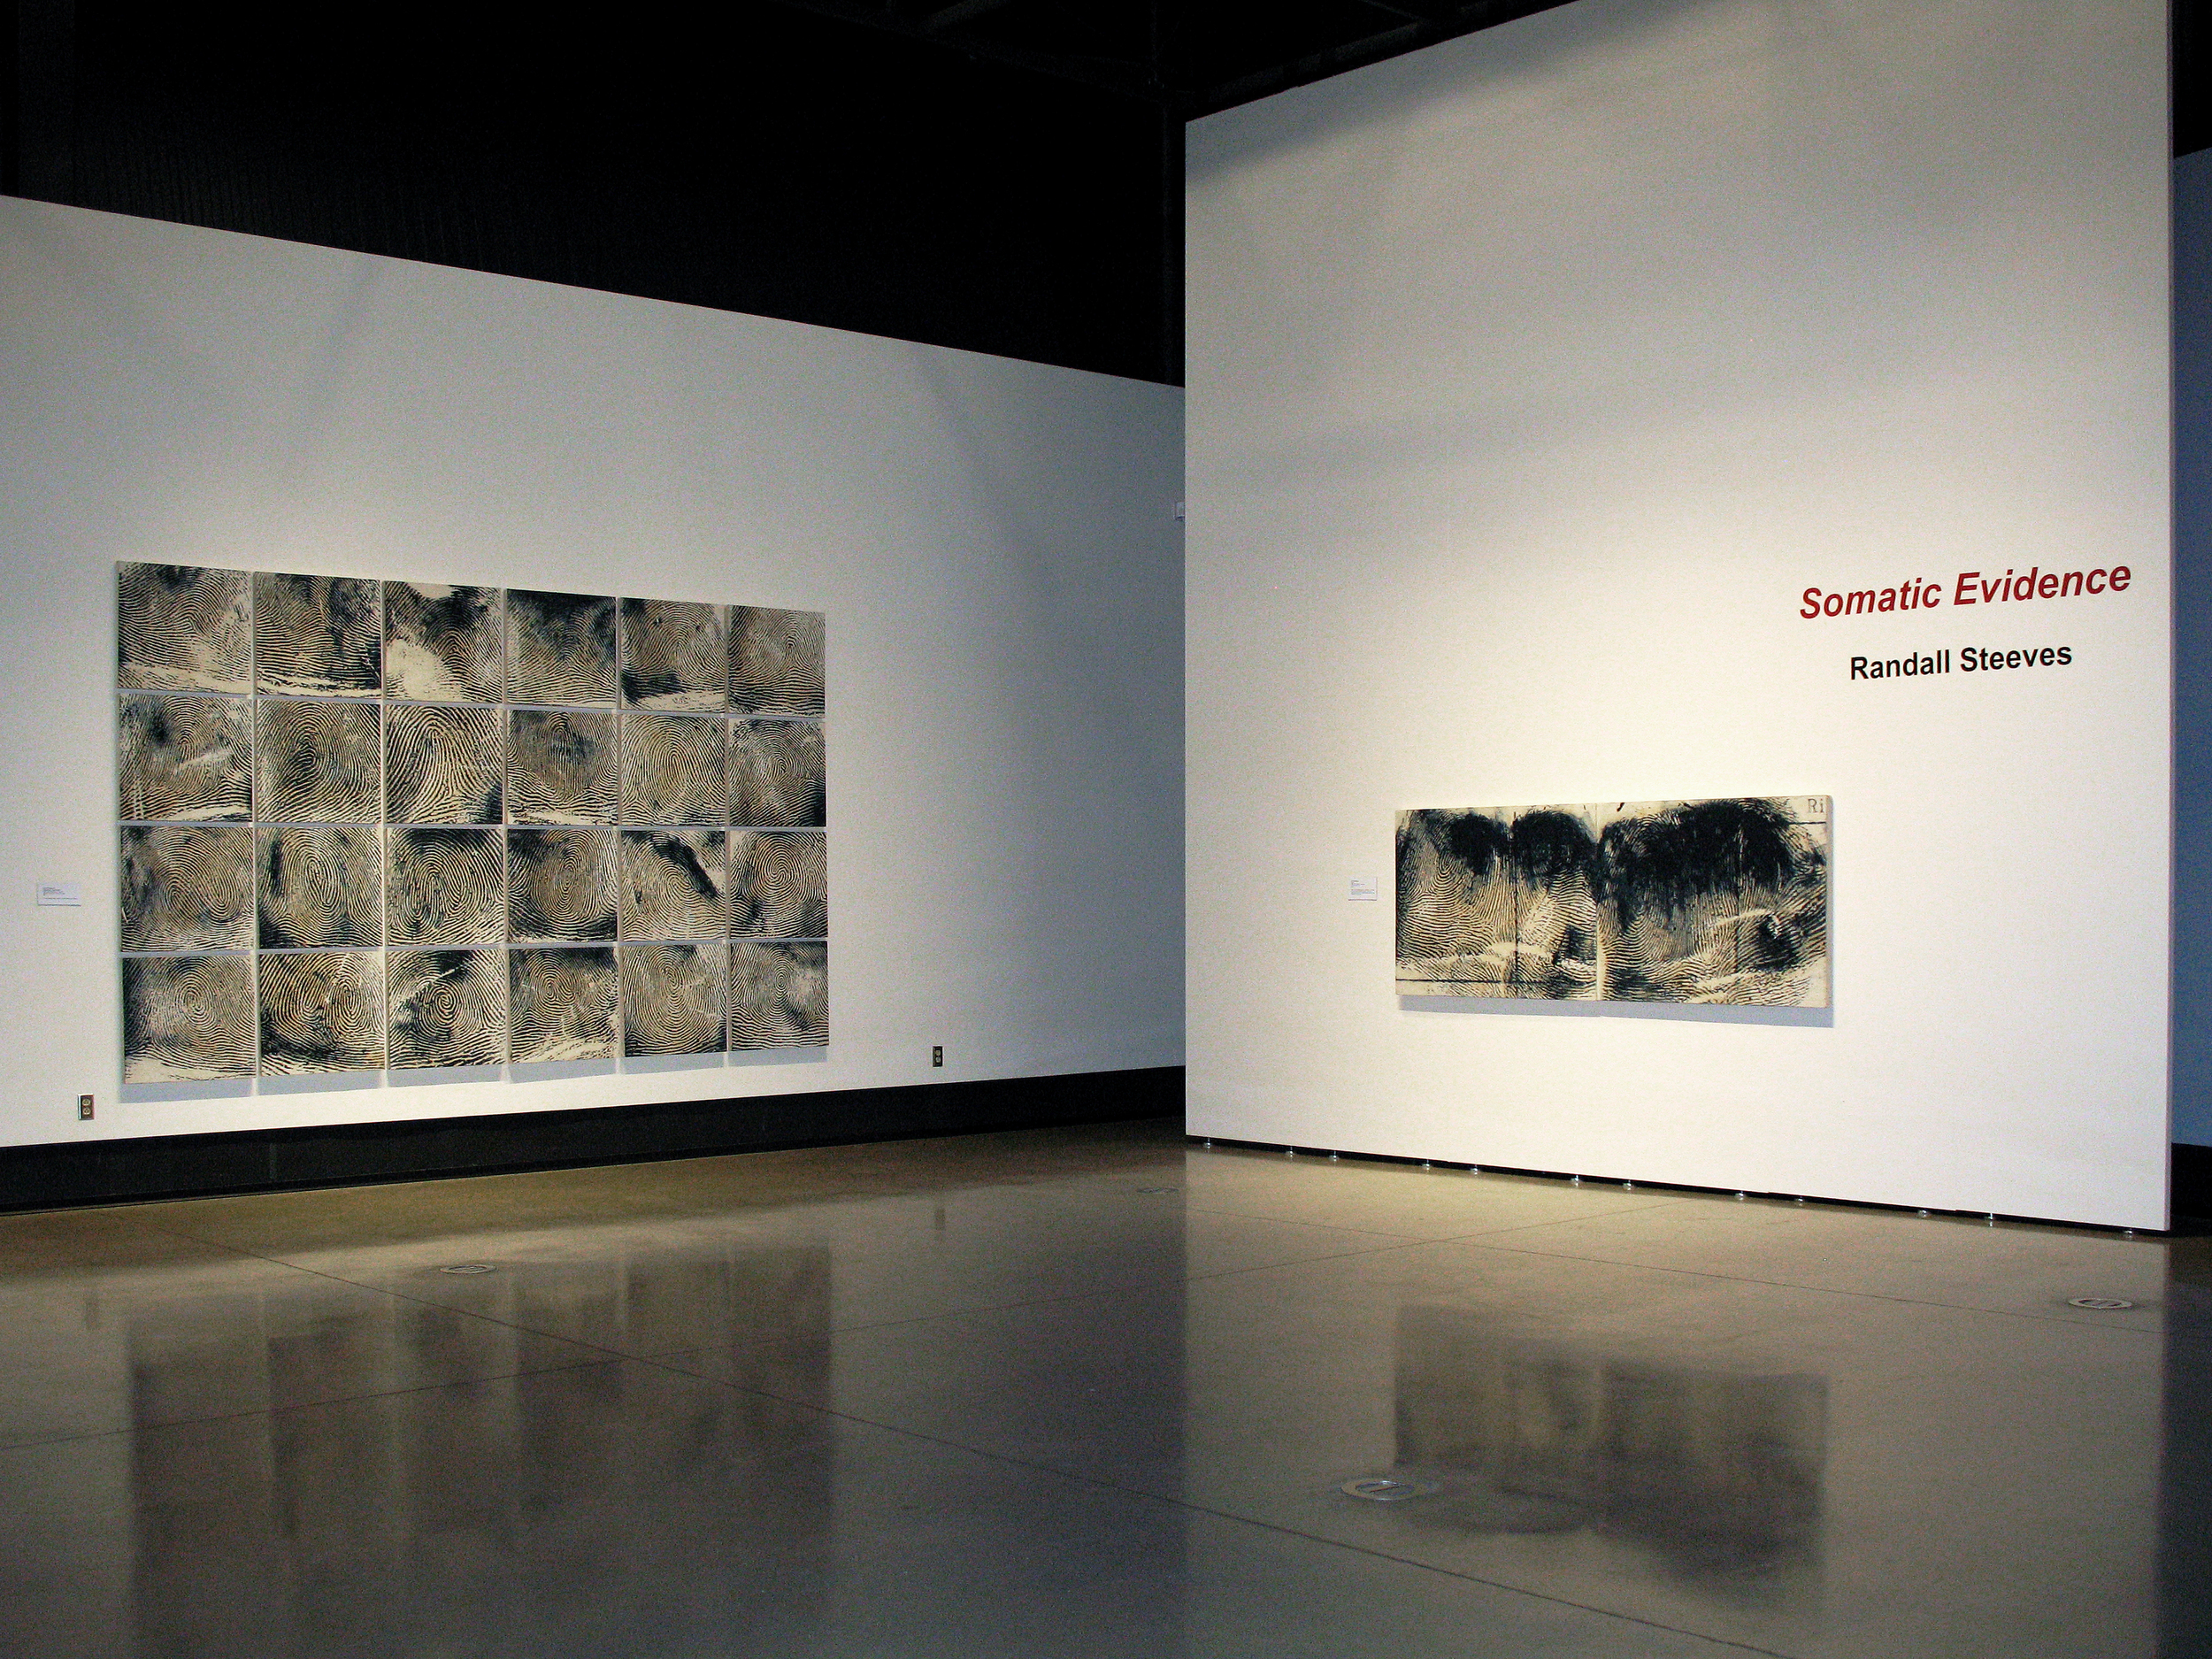   Somatic Evidence  exhibition, Reach Gallery Museum 